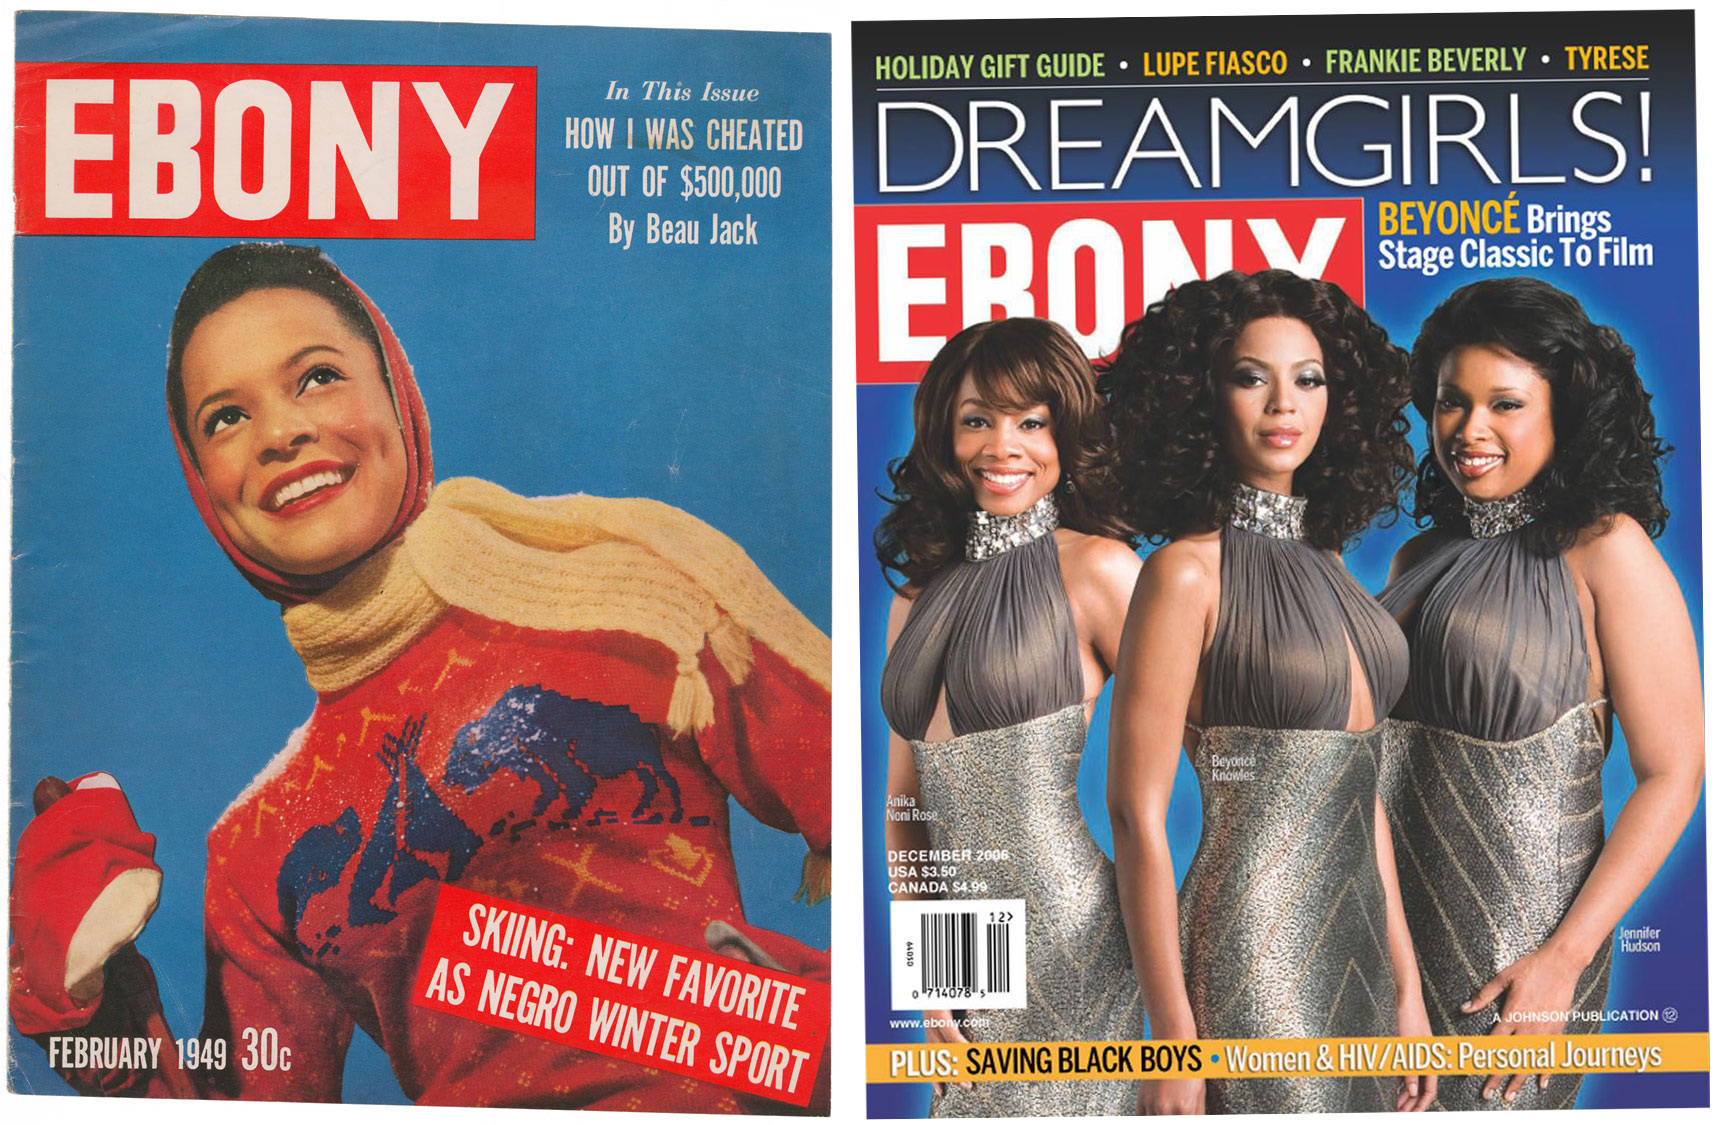 Ebony Magazine’s Creditors Duel Mystery Businessman Over Assets Bloomberg